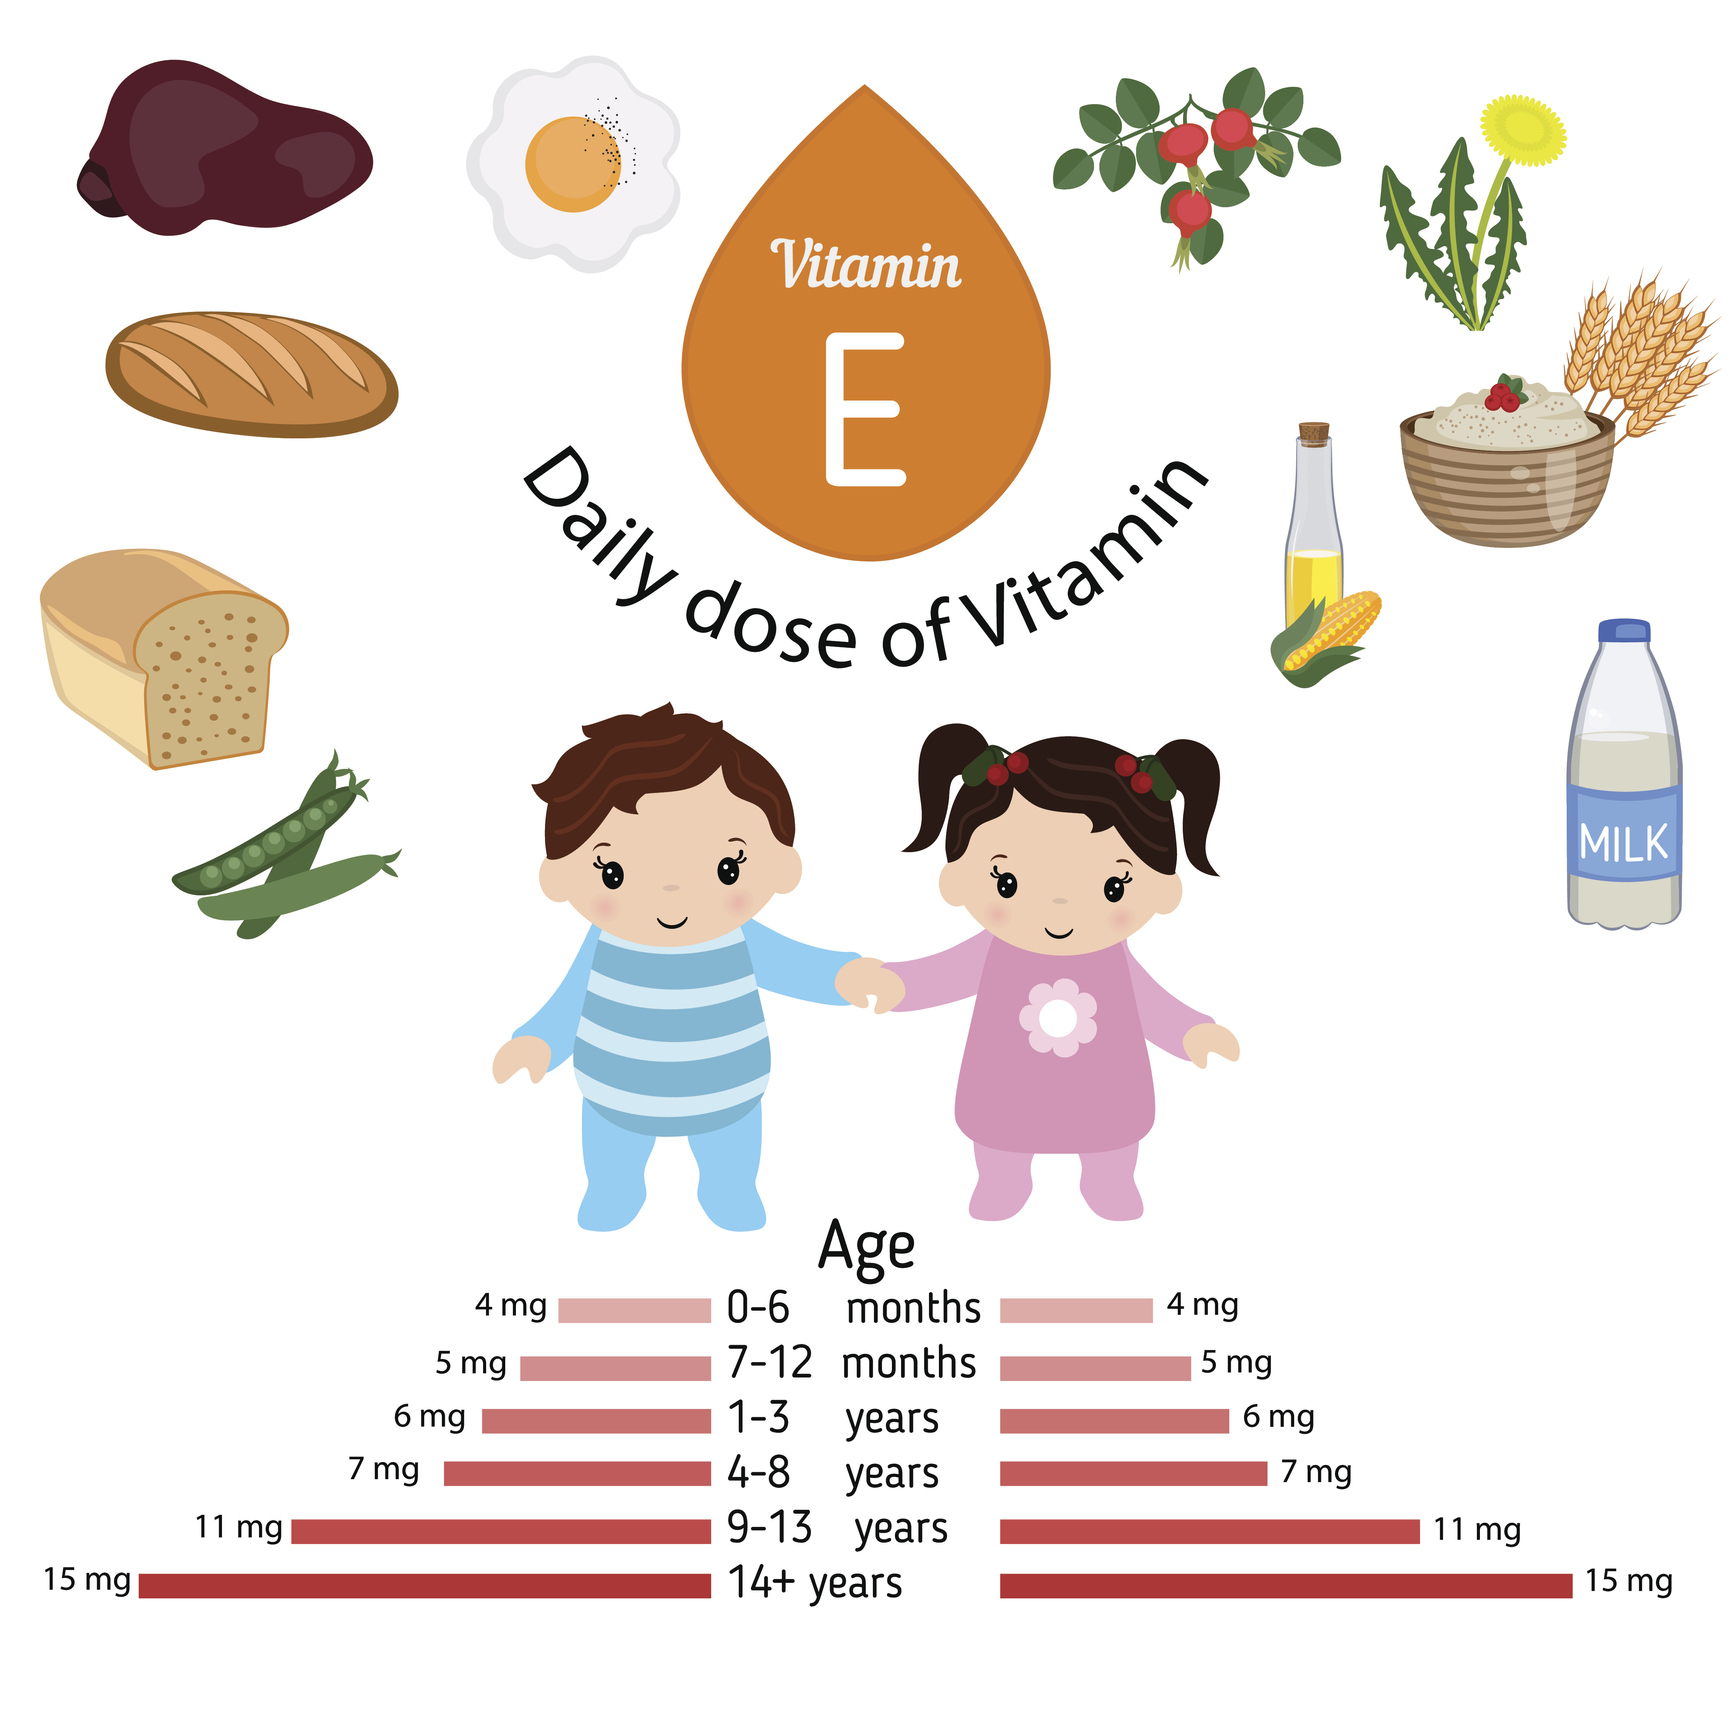 Recommended daily allowance of vitamin E